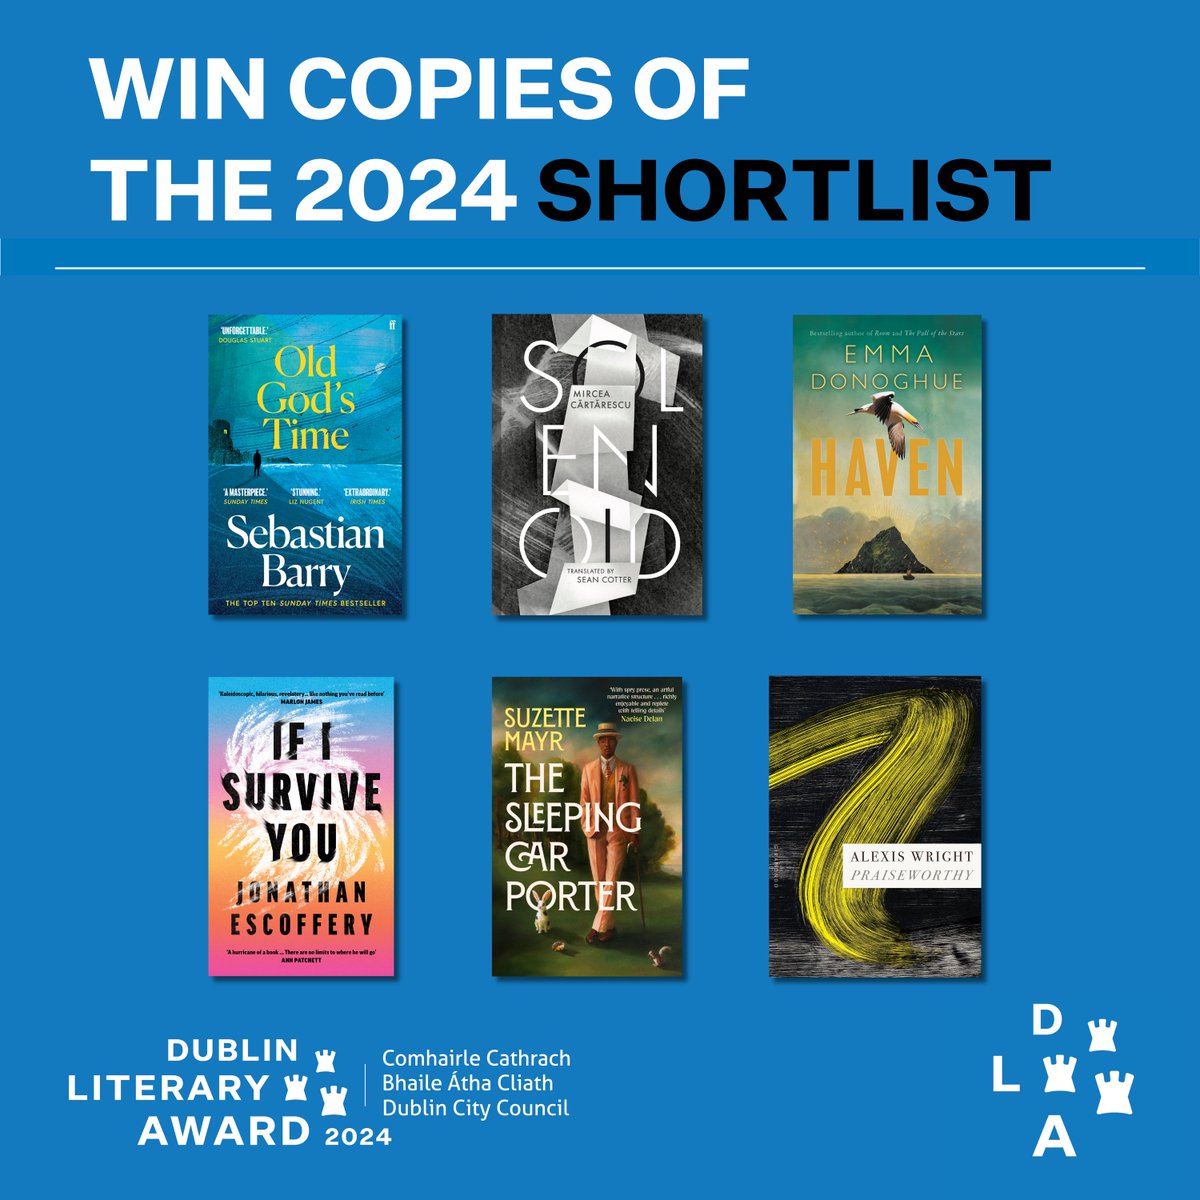 Giveaway alert! 🚨 Win a set of all 6 books on the 2024 Shortlist! All you have to do is LIKE and REPOST this post and FOLLOW @dublinlitaward ⭐ The winner will be announced on Monday 27th May⭐ You can also enter through Instagram here: instagram.com/p/C7MIYdcsQyK/